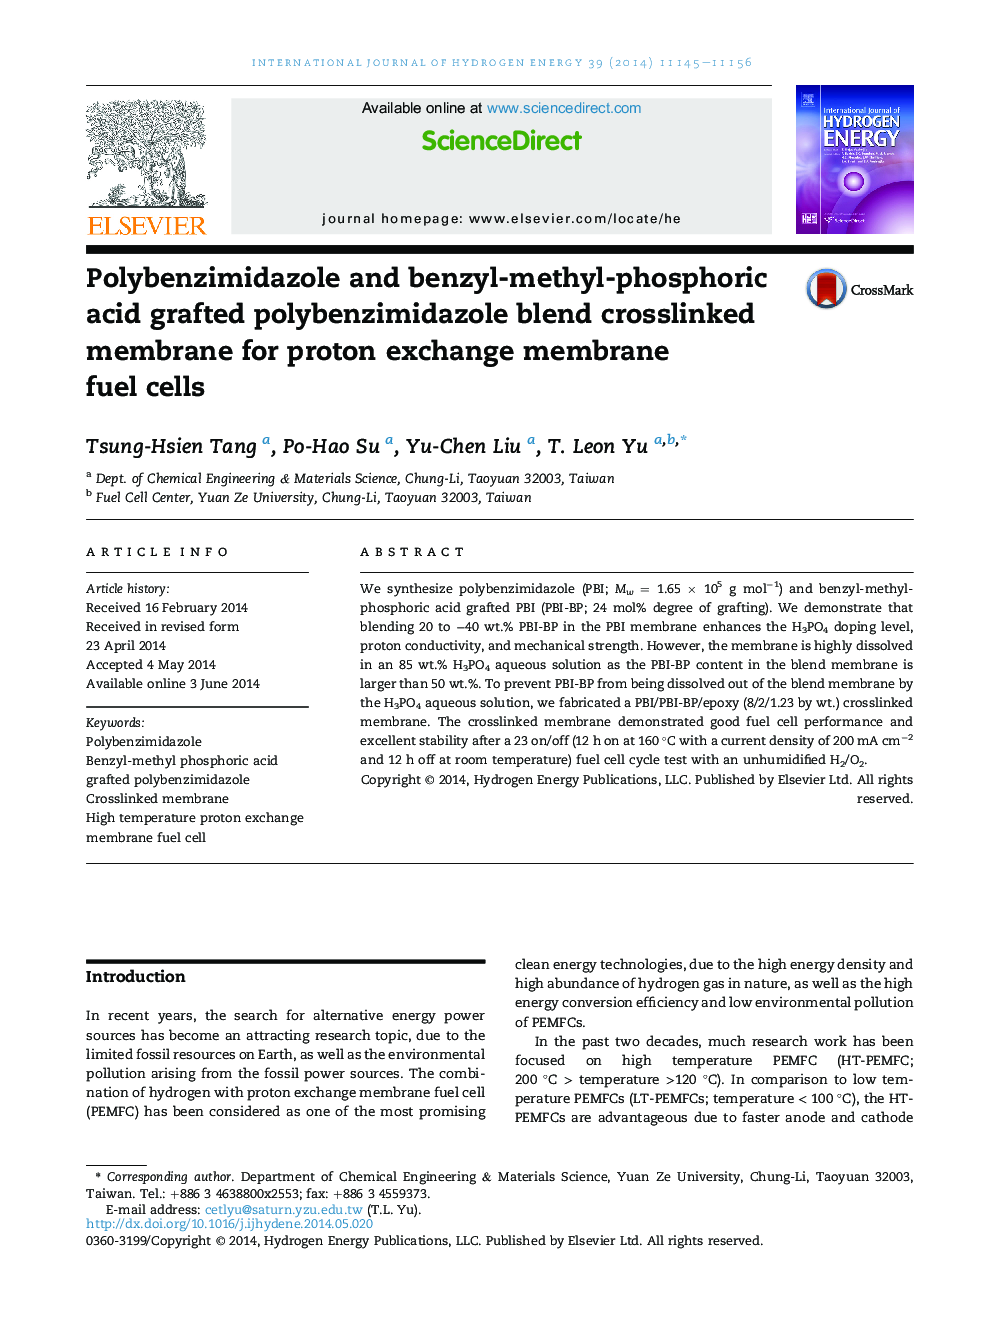 Polybenzimidazole and benzyl-methyl-phosphoric acid grafted polybenzimidazole blend crosslinked membrane for proton exchange membrane fuel cells